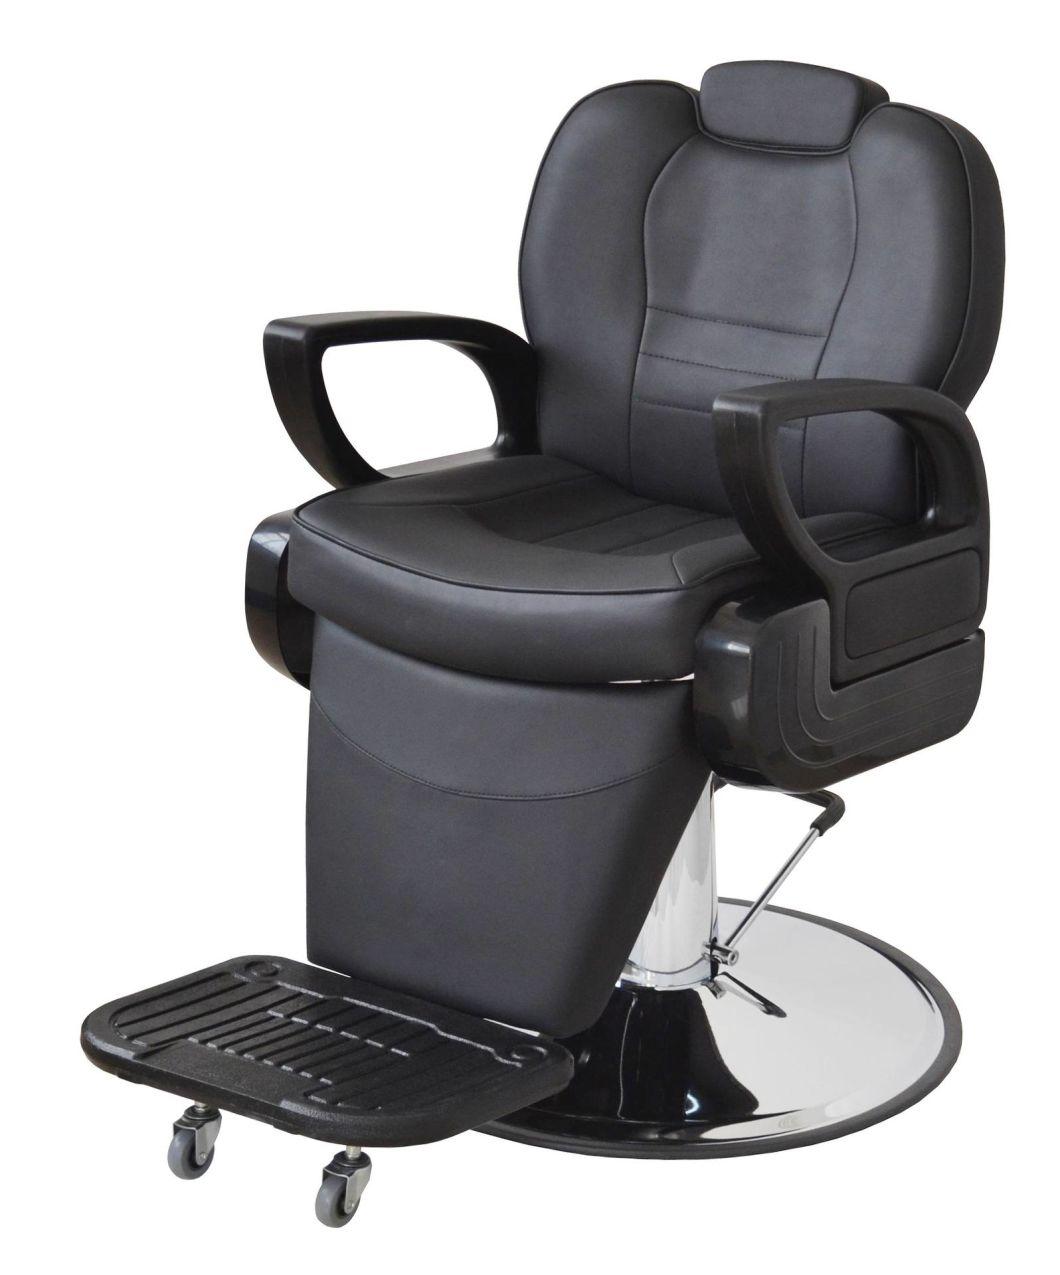 Hl-9217 Salon Barber Chair for Man or Woman with Stainless Steel Armrest and Aluminum Pedal